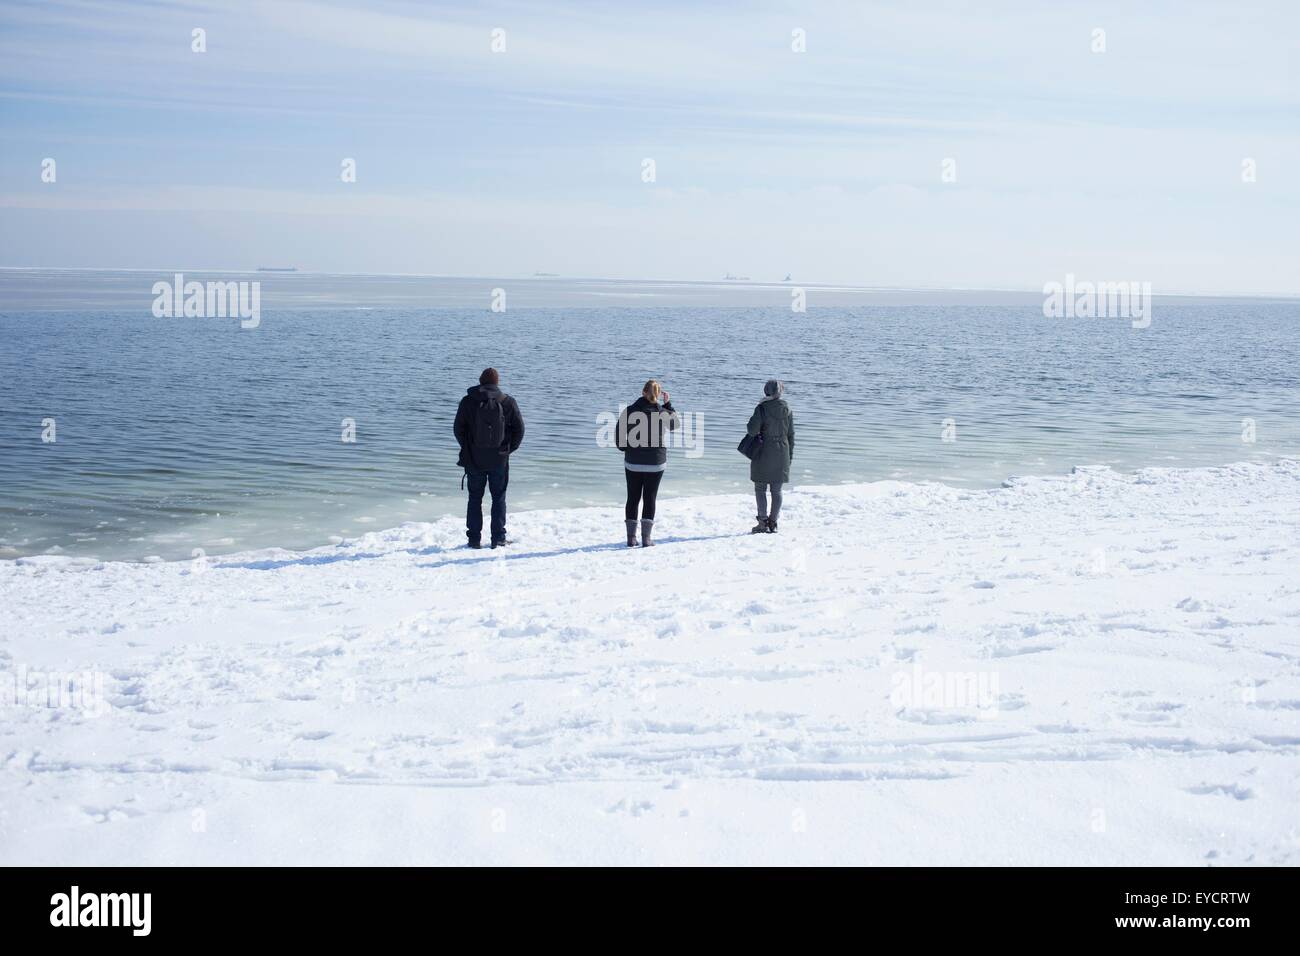 Three adults looking out to sea, Fairfield, Connecticut, USA Stock Photo